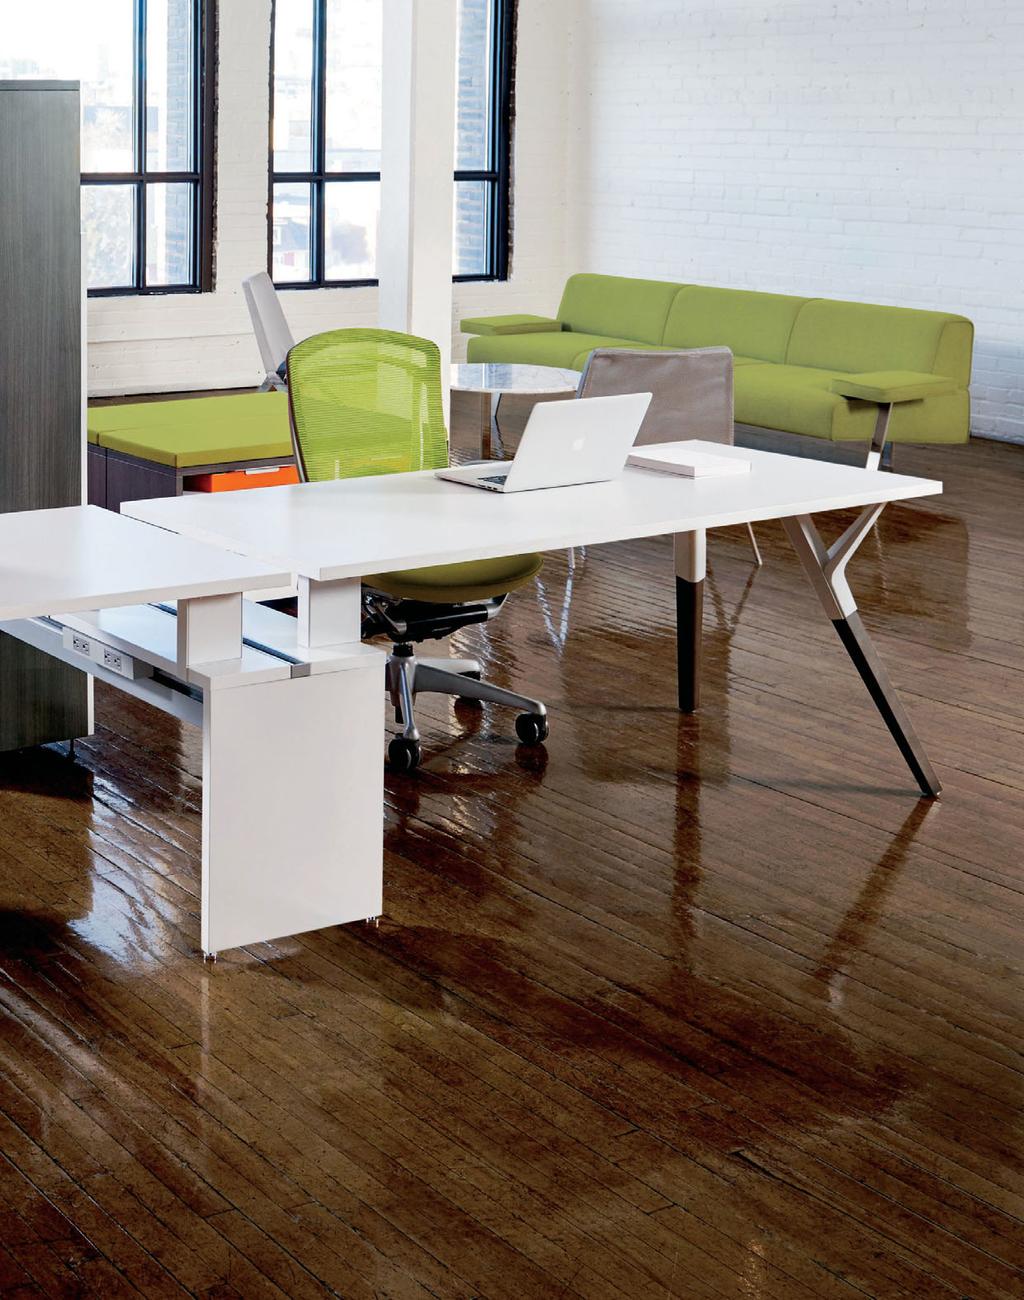 unit integrates a full complement of desks, height-adjustable tables, cabinets, shelves, cubbies and screens. Every element moves into place and fits together, offering fresh design concepts.